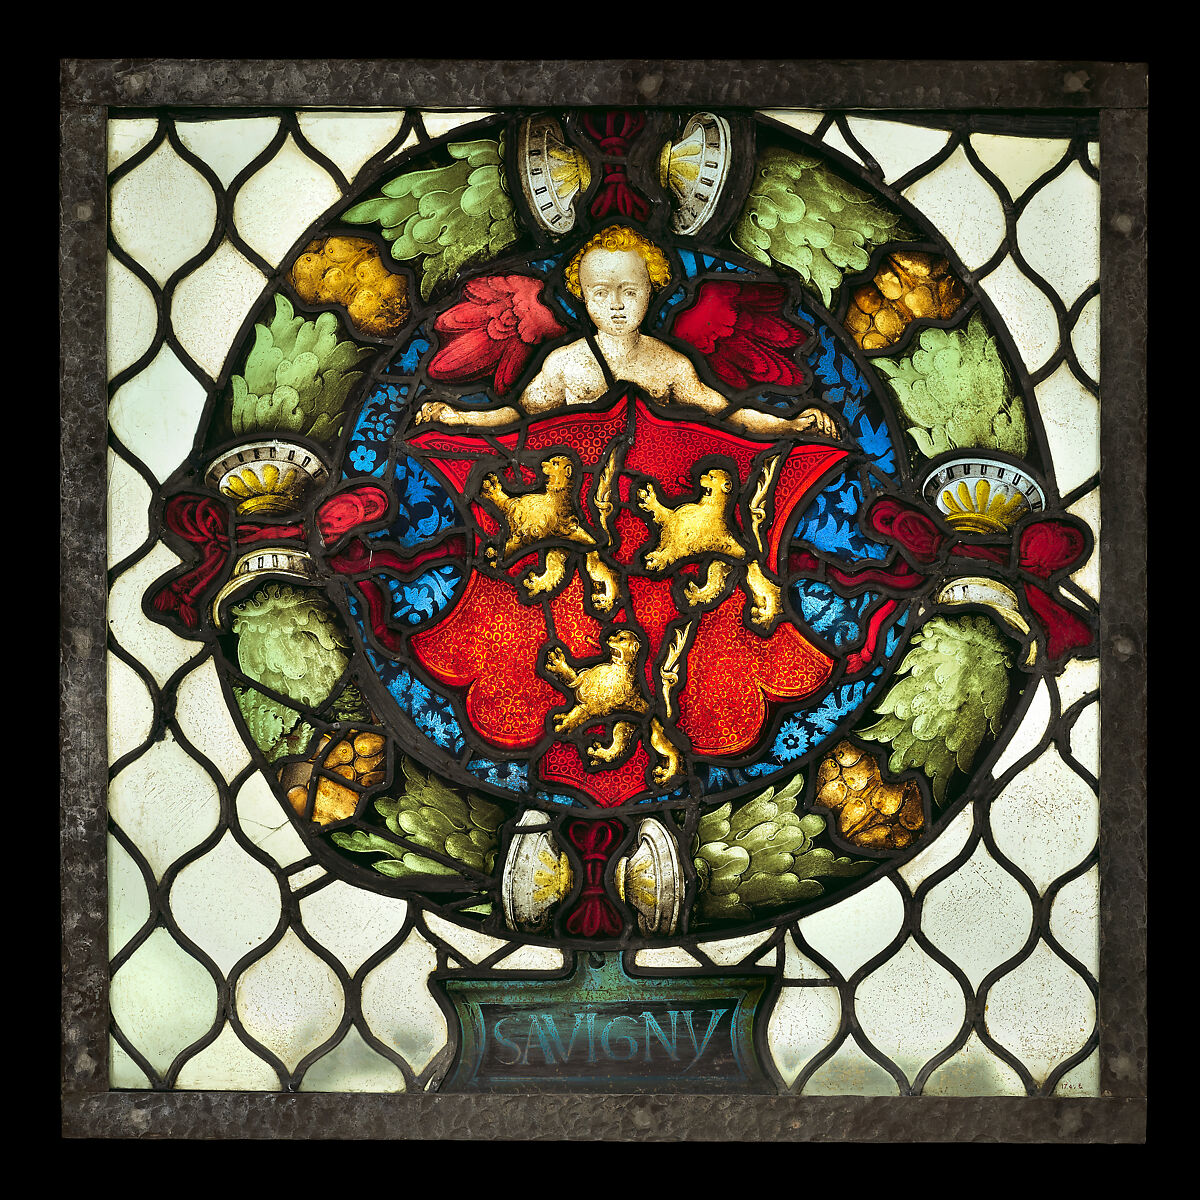 The Savigny Arms, Valentin Bousch (French, active 1514–41, died 1541), Stained glass, French, Lorraine, Metz 